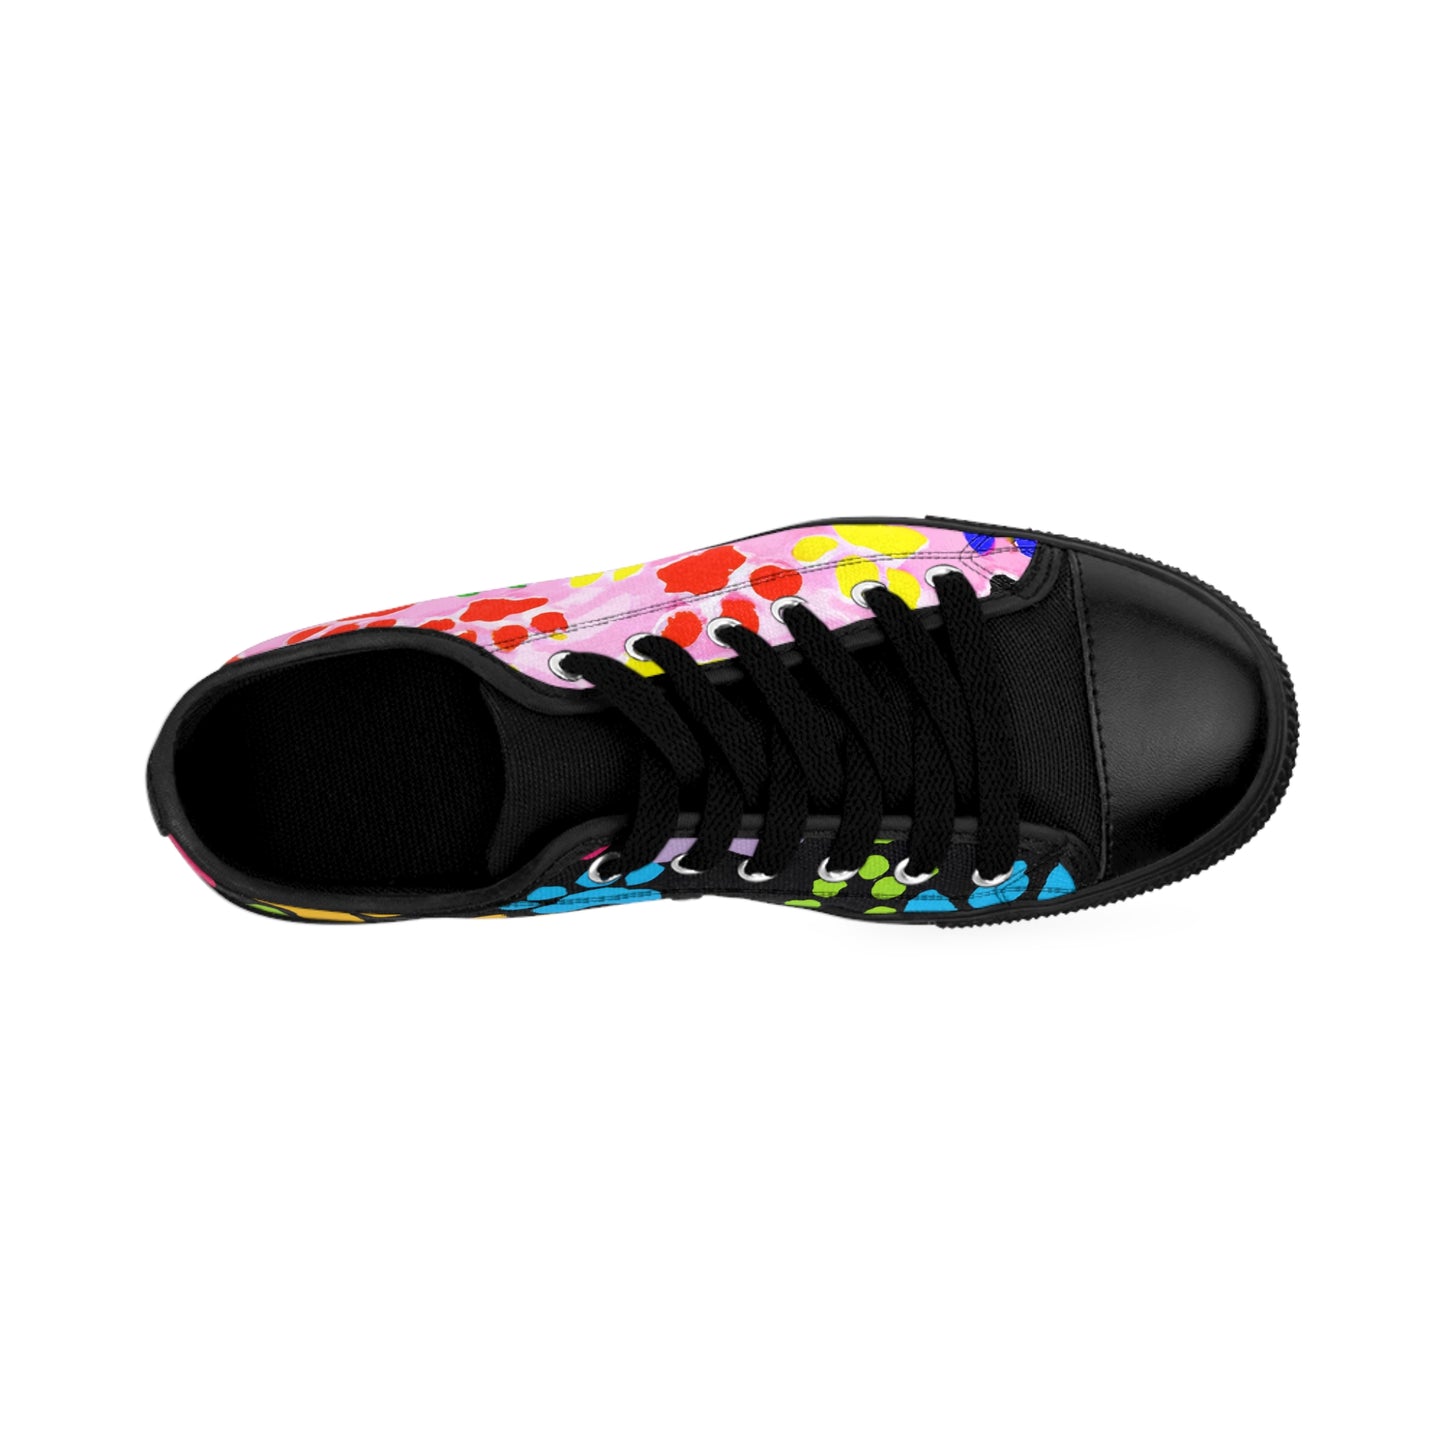 Gaultier Dior - Paw Print - Low-Top